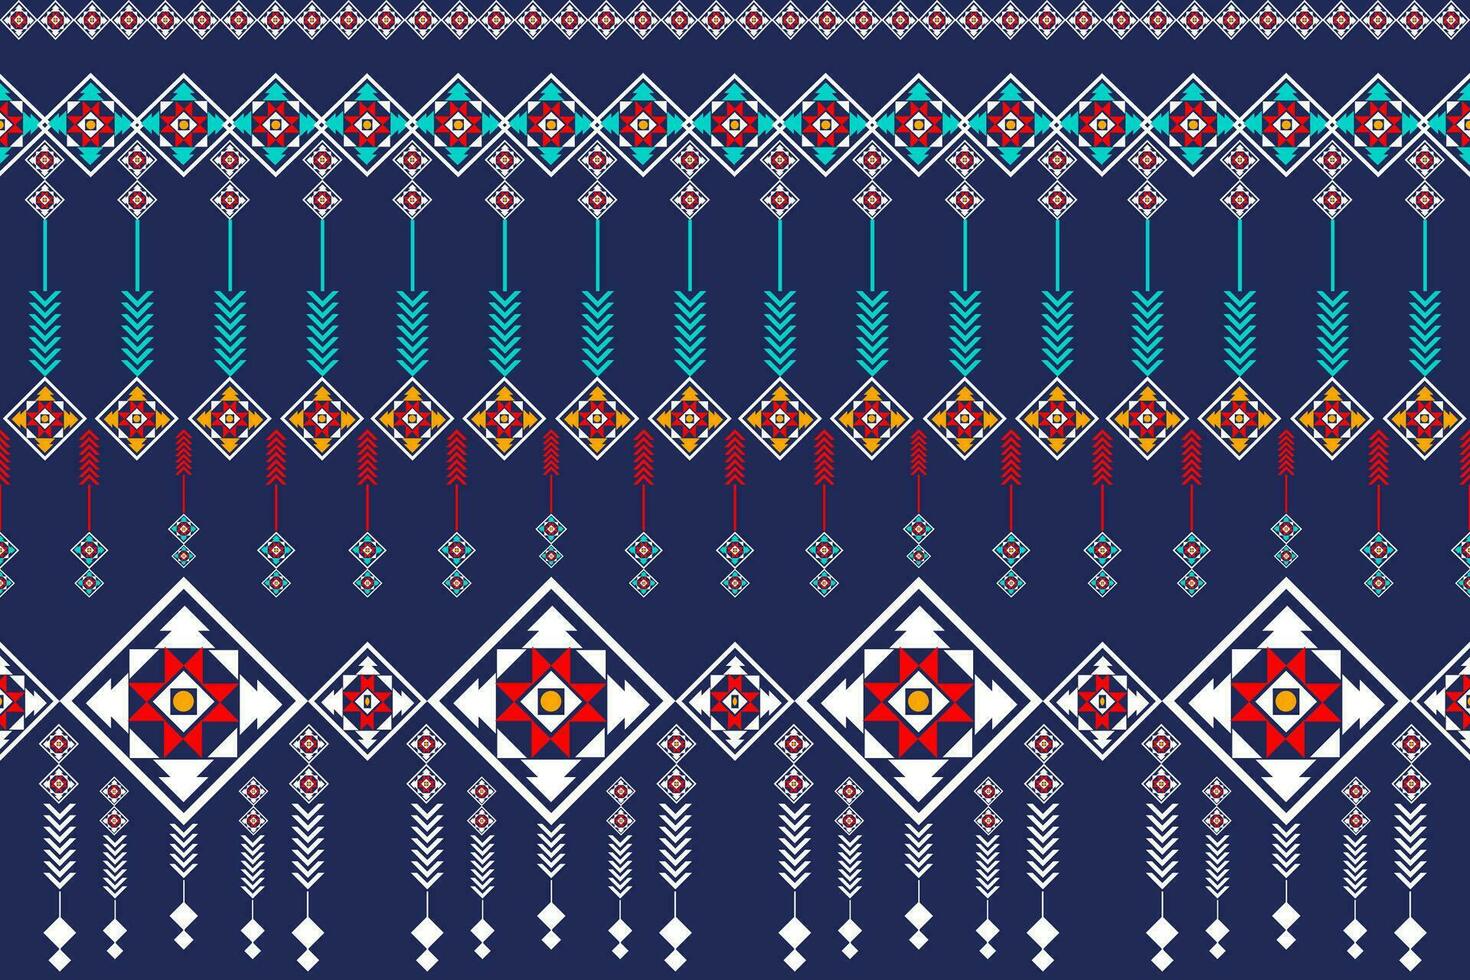 Ethnic geometric seamless pattern. Design for fabric, clothes, decorative paper, wrapping, embroidery, illustration, vector, tribal patter vector